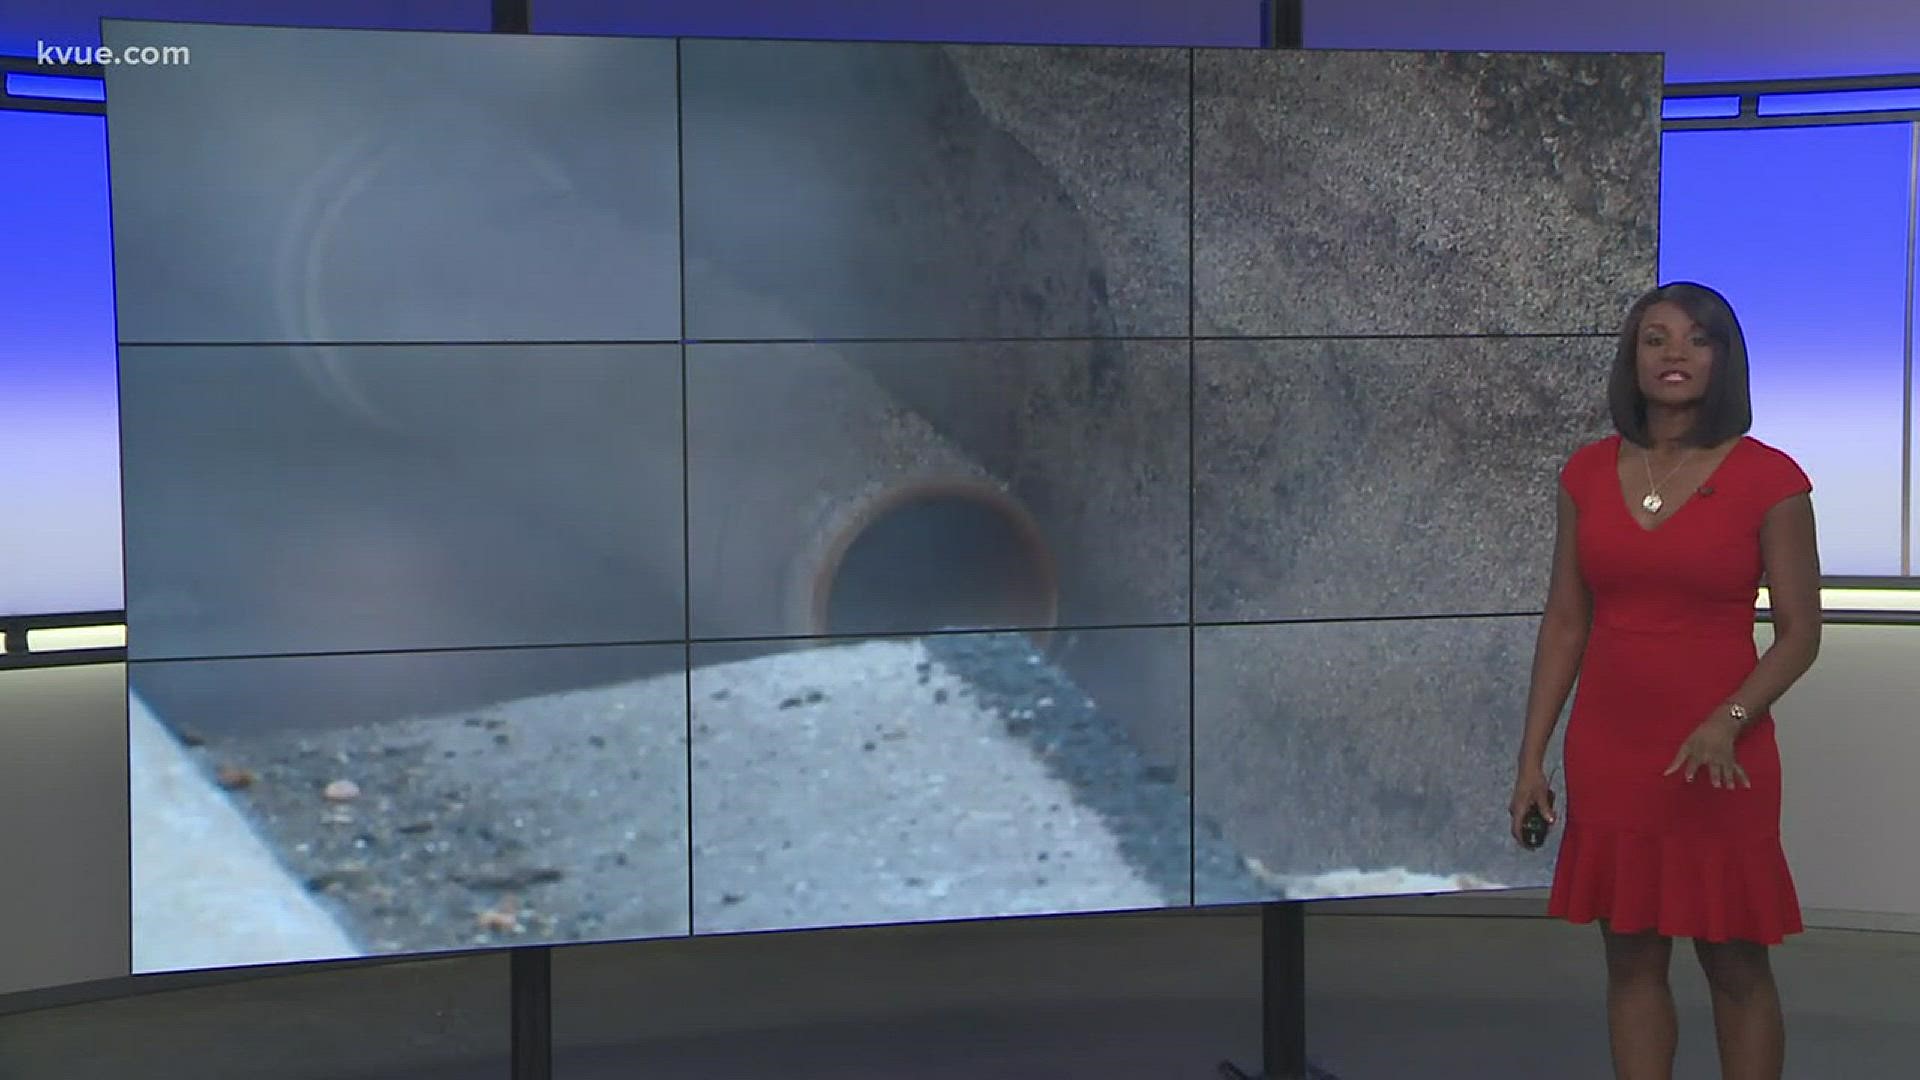 10 homes in Williamson County have no water because of this giant sinkhole.